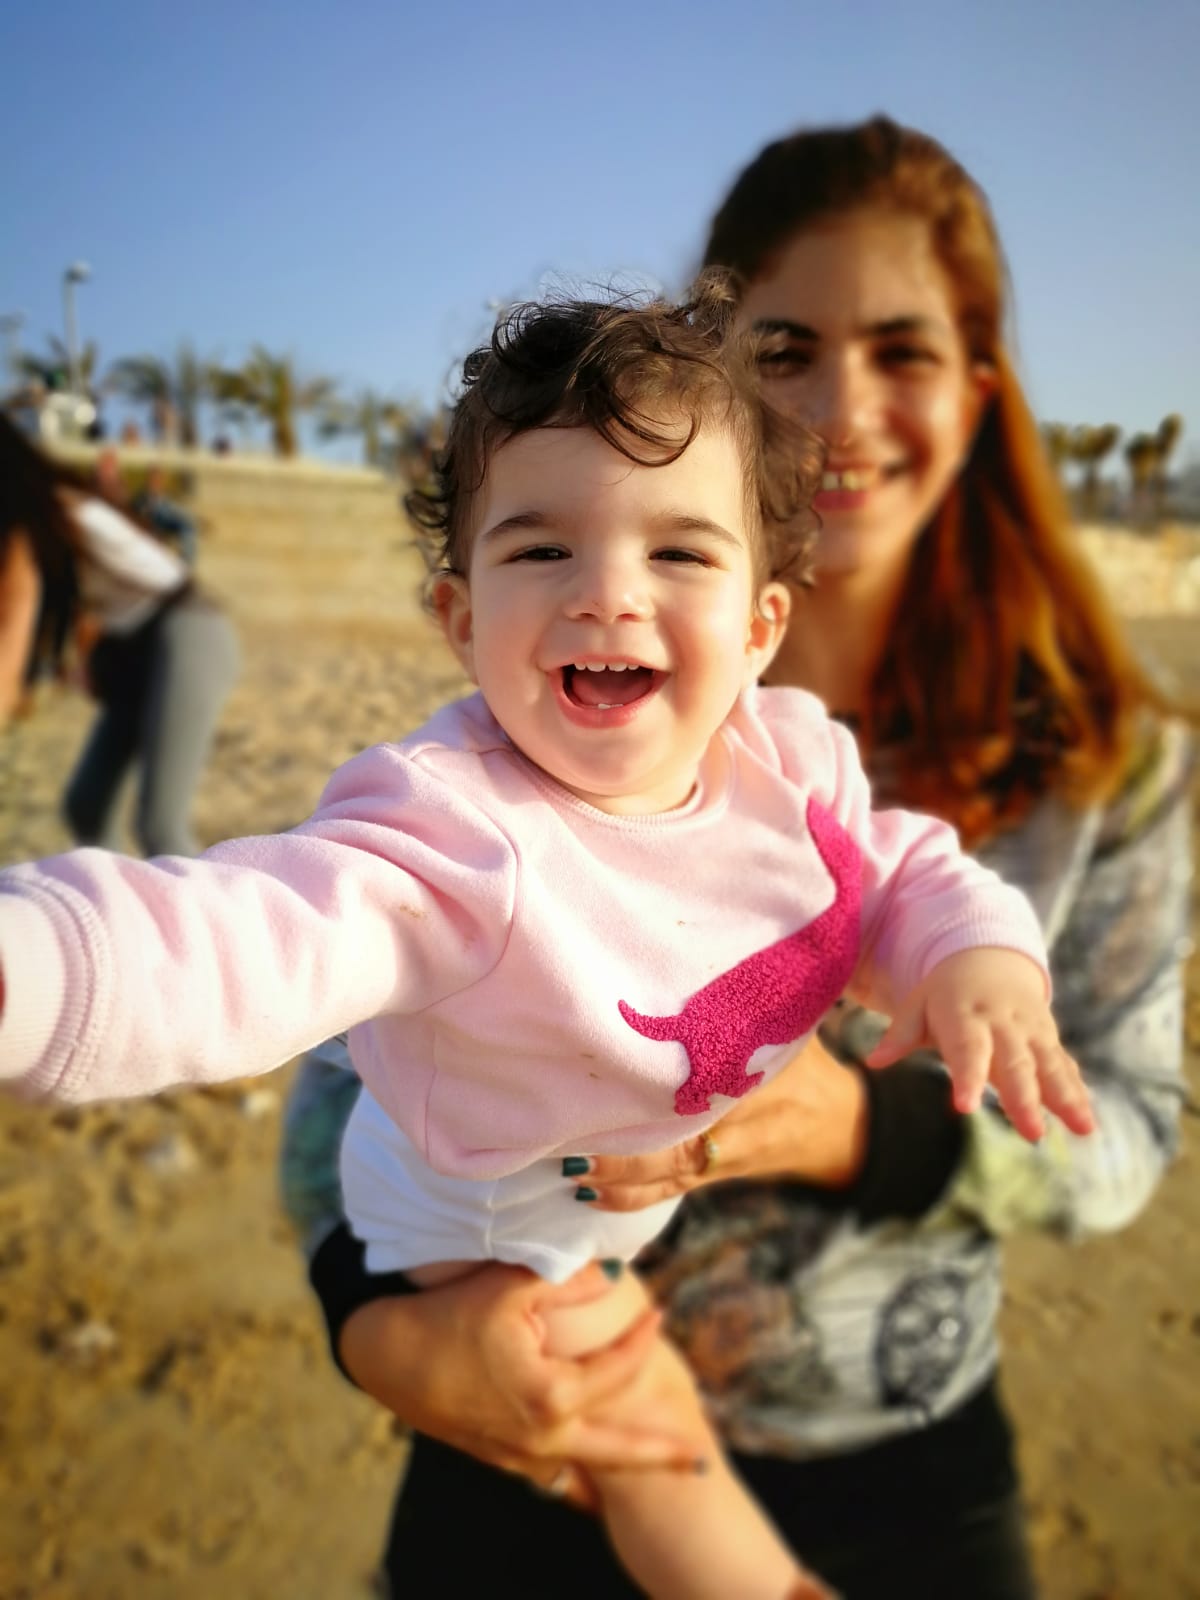 Ochry Air and her daughter on Tel Aviv beach (MEE)